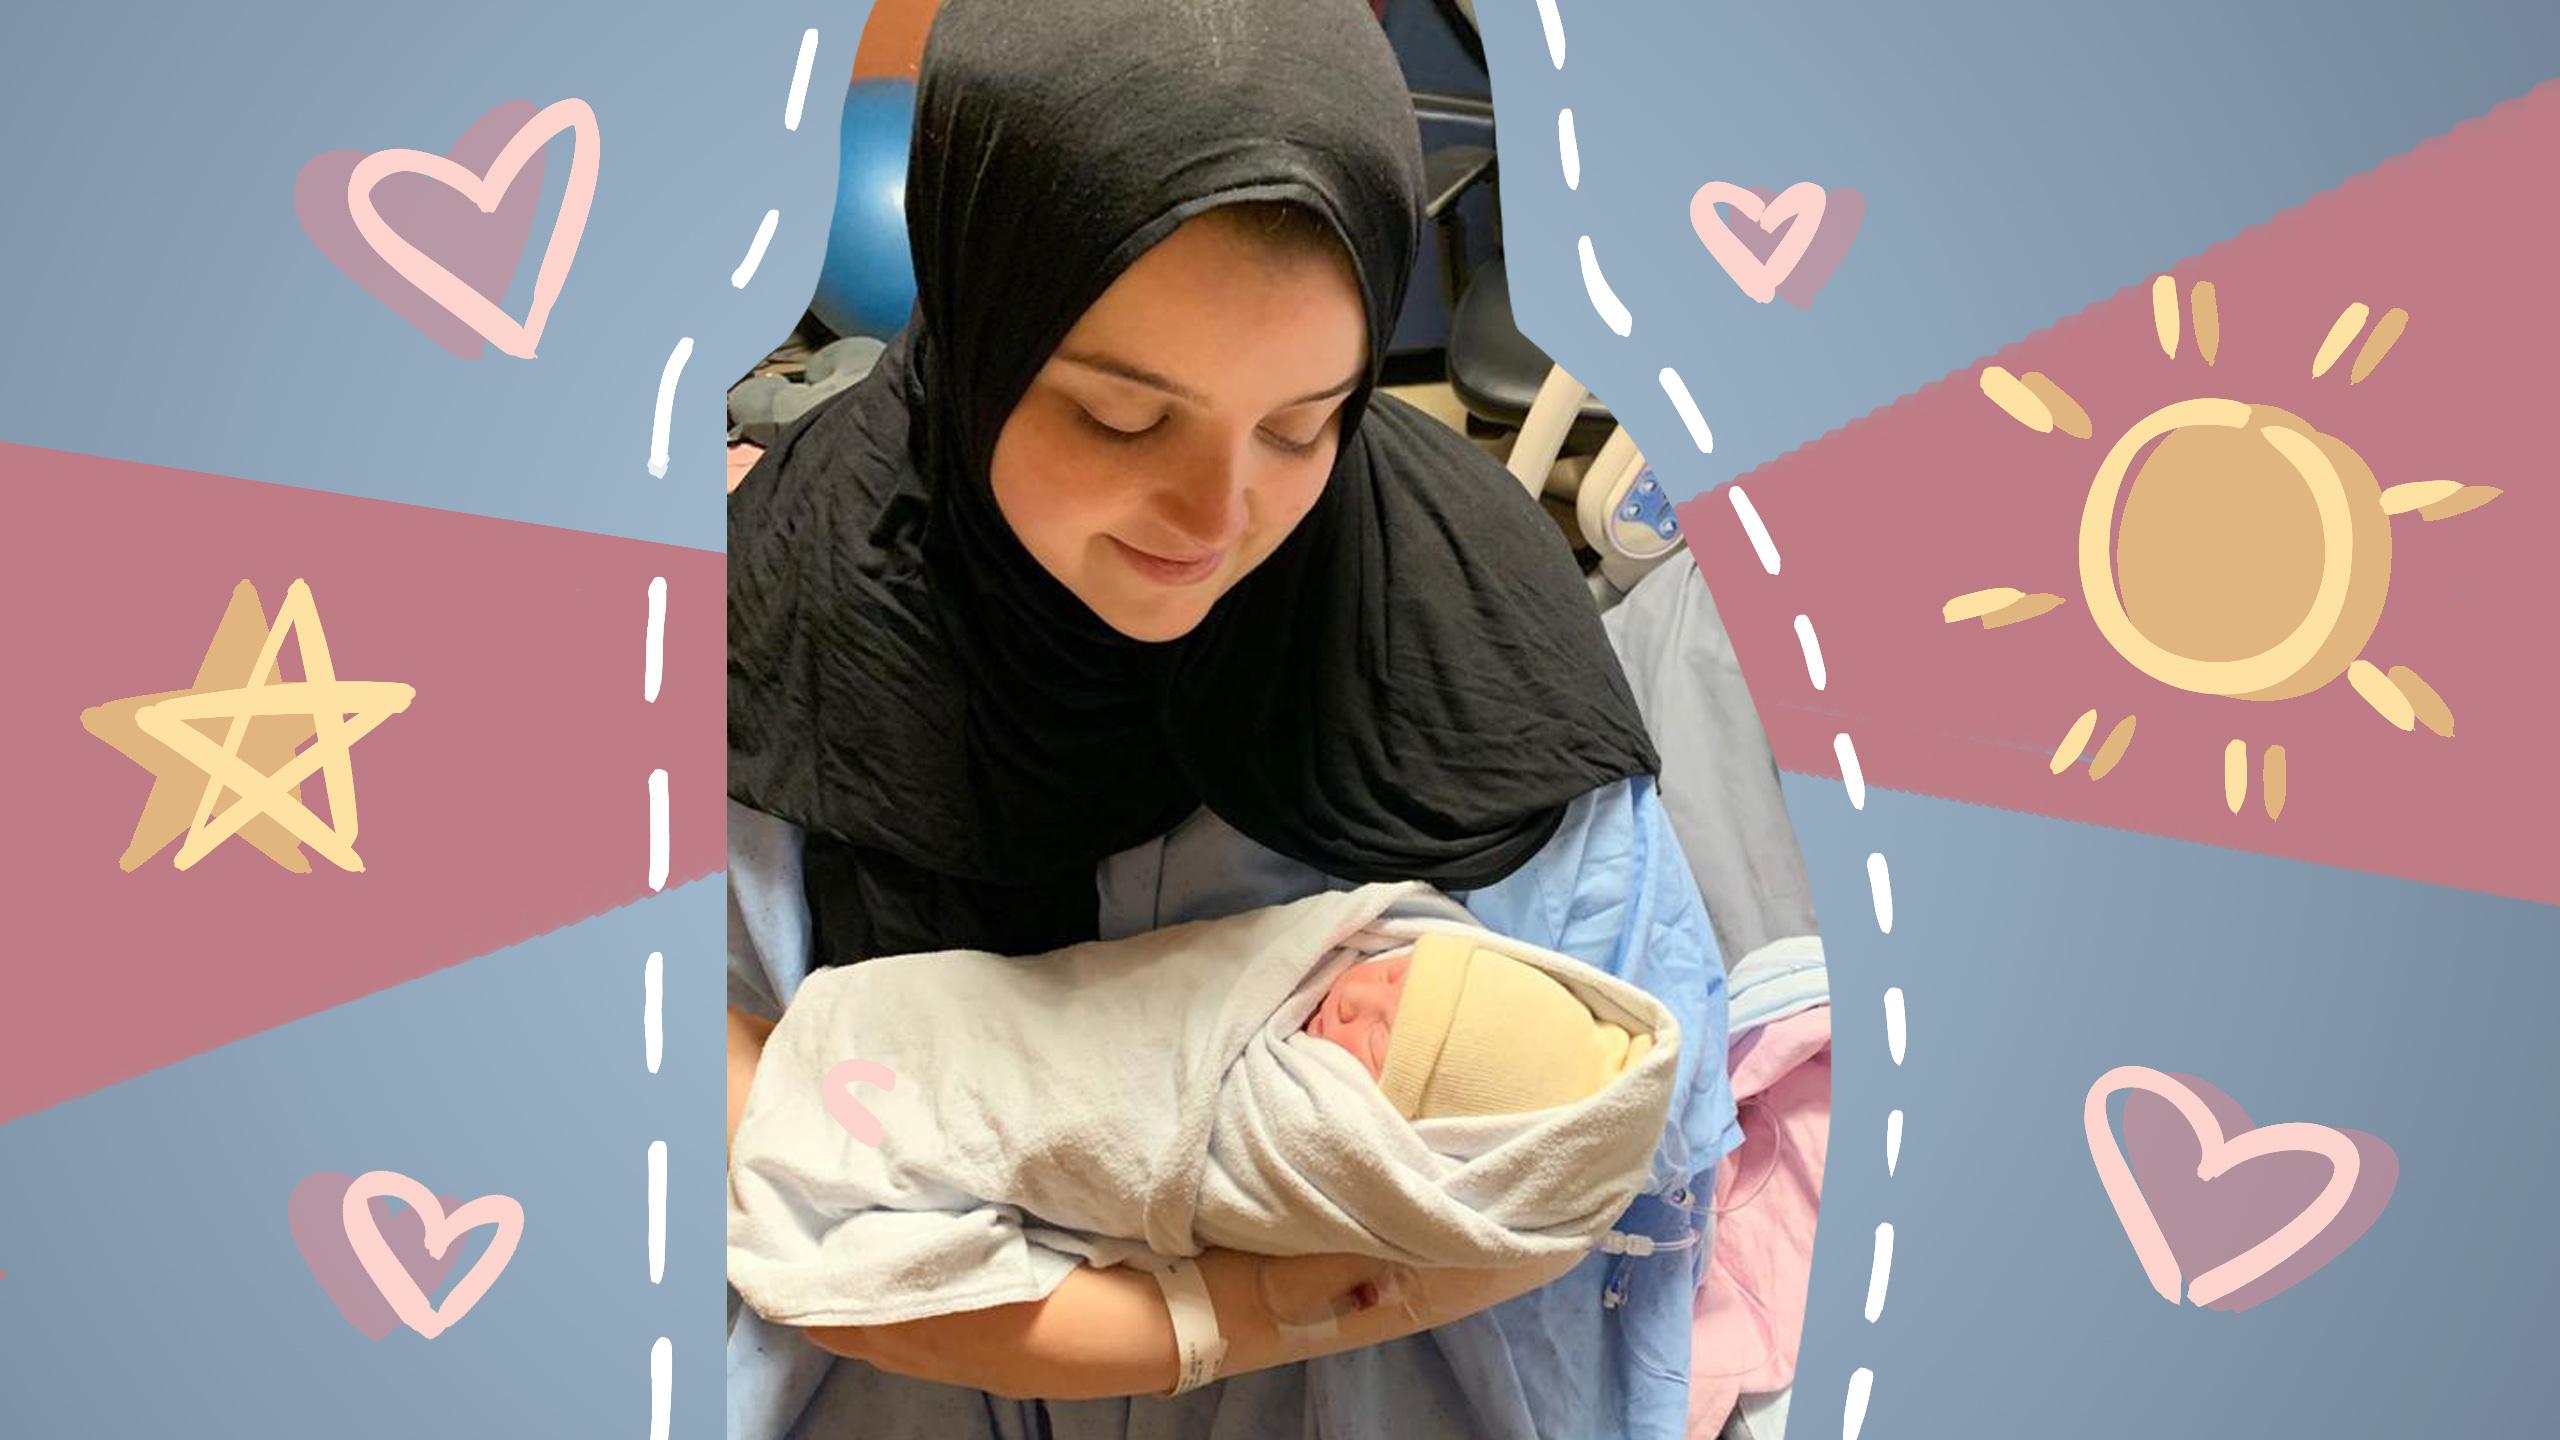 A smiling woman sitting in a hospital bed wearing a hijab holding a newborn baby in her arms.